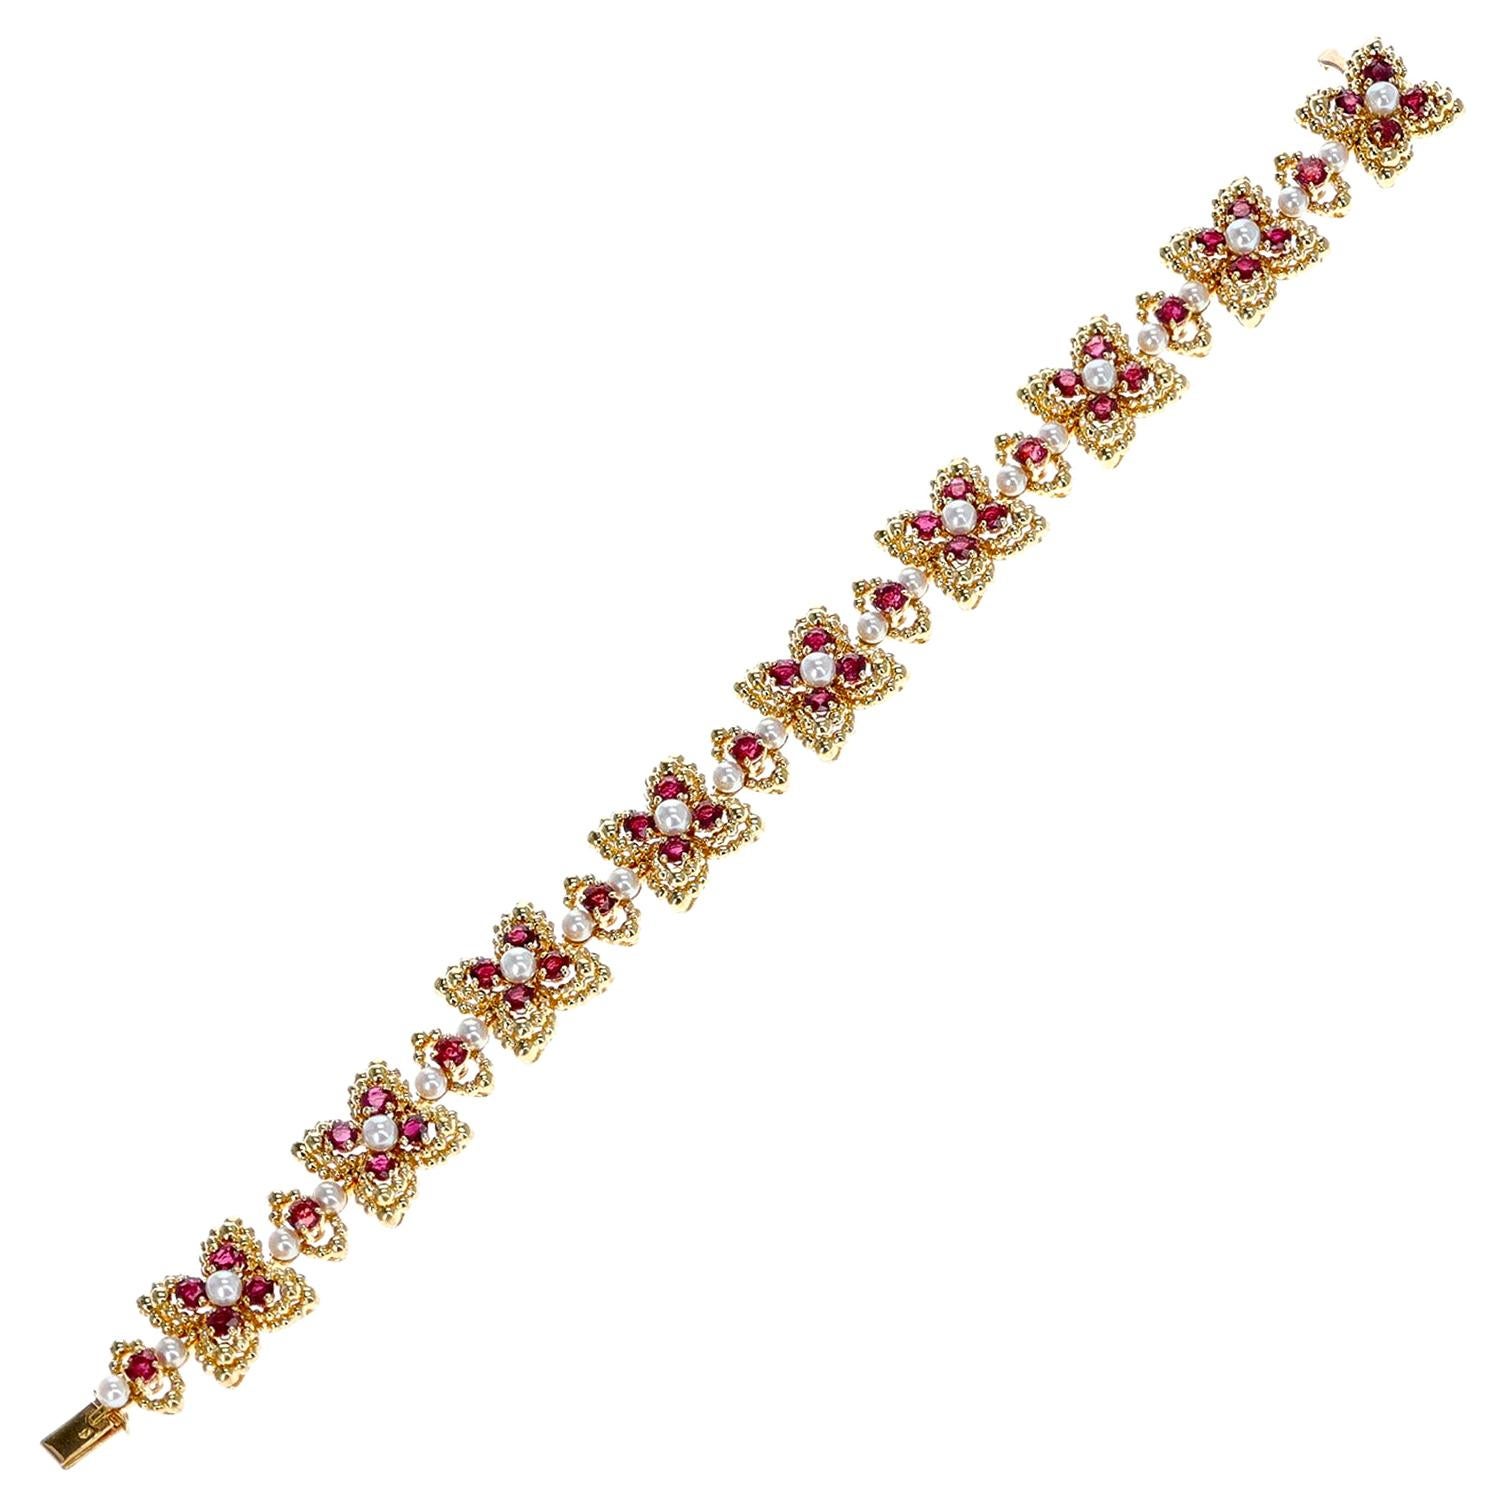 French Alexandre Reza 7.41 Ct. Ruby and Pearl Bracelet with French Marks, 18K For Sale